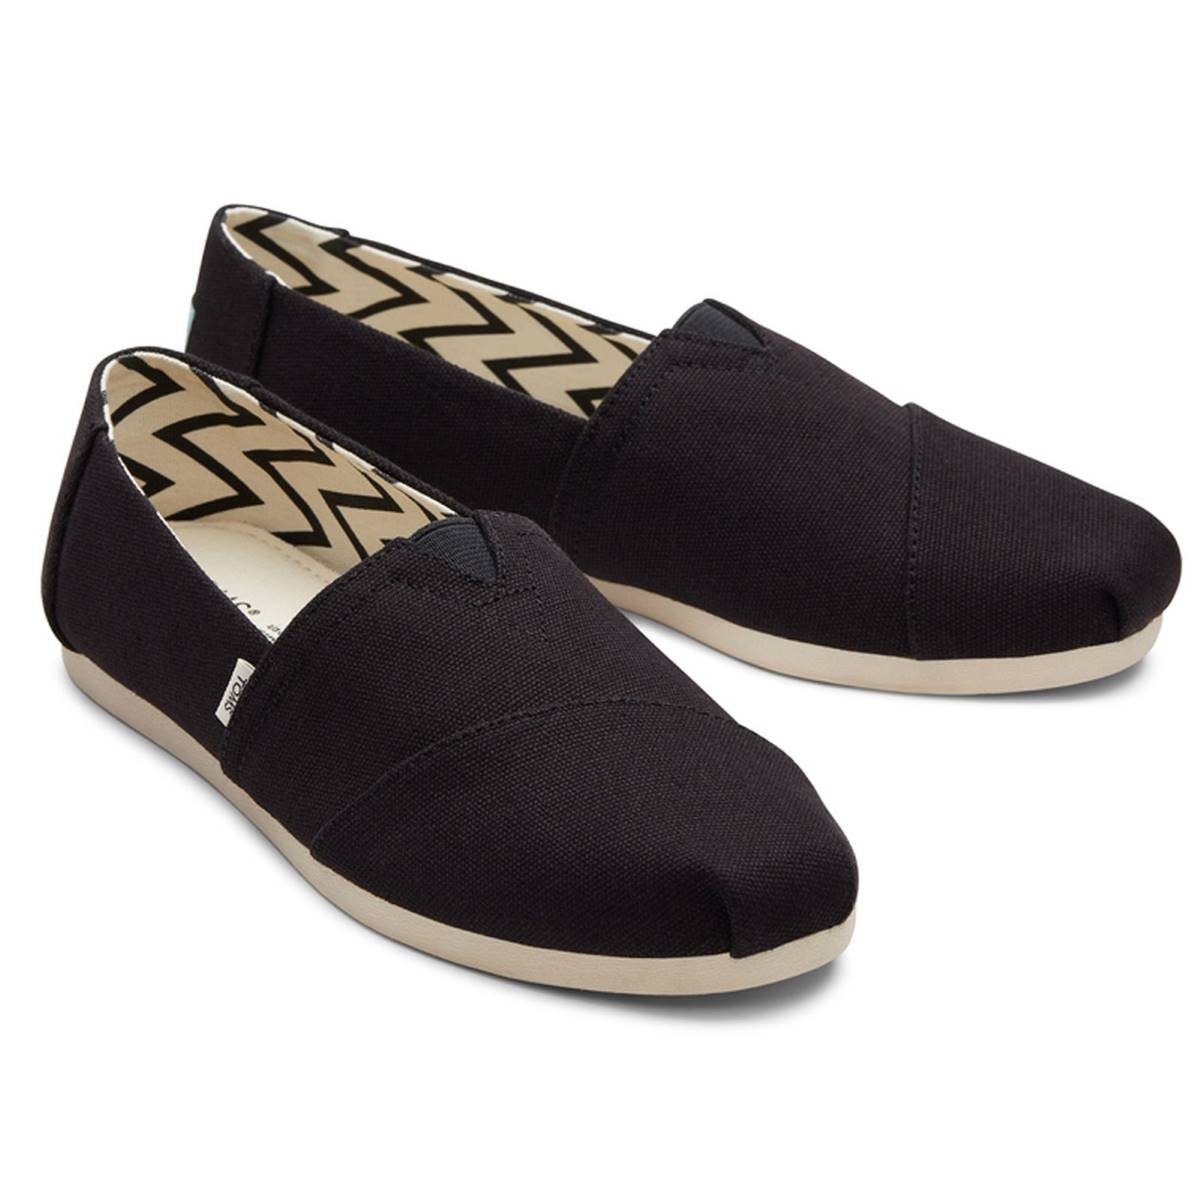 Toms Alpargata Black Womens trainers 10017732 in a Plain Canvas in Size 8